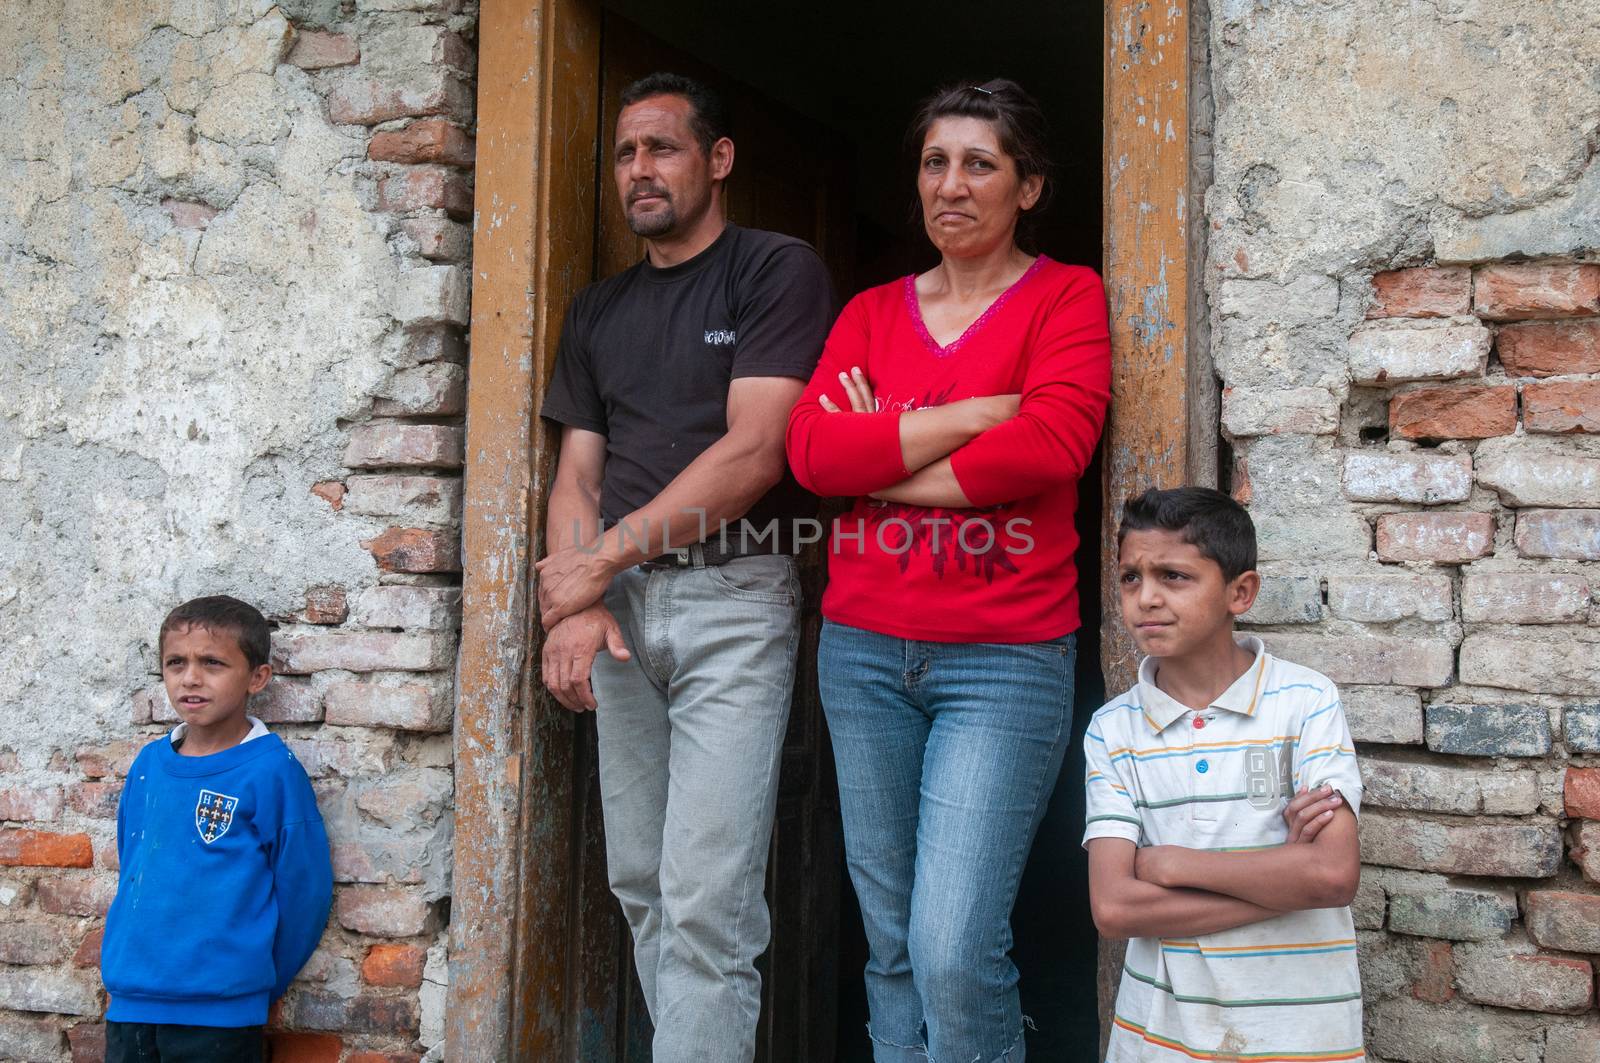 No opportunities for the Roma or Gypsy people in Slovakia. They suffer discrimination, poverty with no dignity. Portraits of boys, girls, children. by gonzalobell